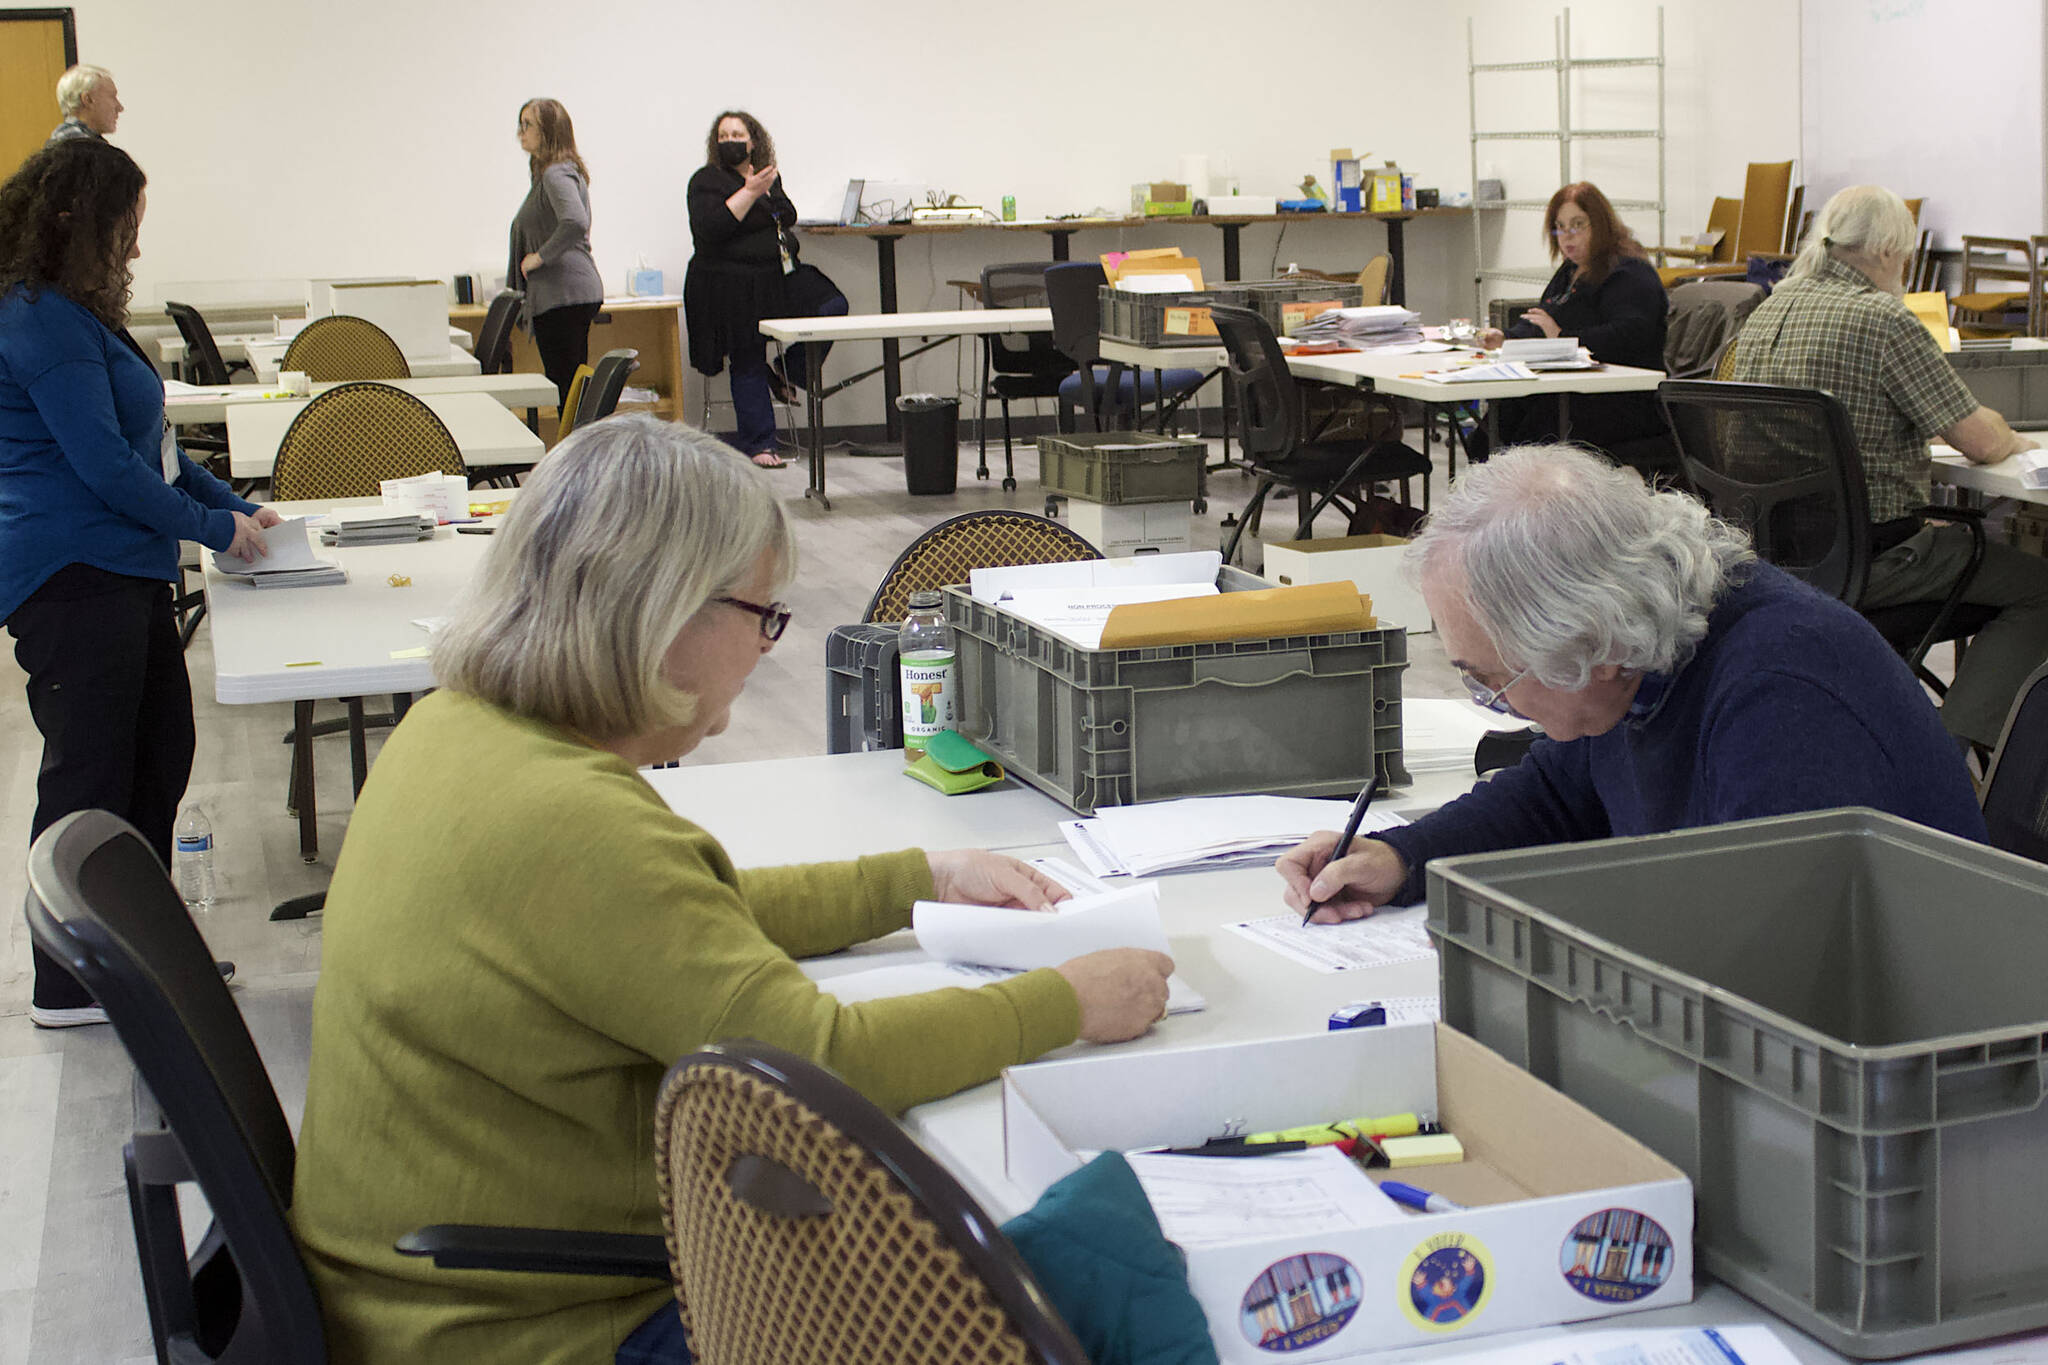 Pat Tynan, left, and Tom Melville, review absentee ballots Tuesday, Nov. 15, 2022, at the Division of Elections office at the Mendenhall Mall in Juneau, Alaska. The review process is taking place in a separate room from where ballots are being tallied for the official results. (Mark Sabbatini / Juneau Empire)
Pat Tynan, left, and Tom Melville, review absentee ballots Tuesday, Nov. 15, 2022, at the Division of Elections office at the Mendenhall Mall in Juneau, Alaska. The review process is taking place in a separate room from where ballots are being tallied for the official results. (Mark Sabbatini / Juneau Empire)